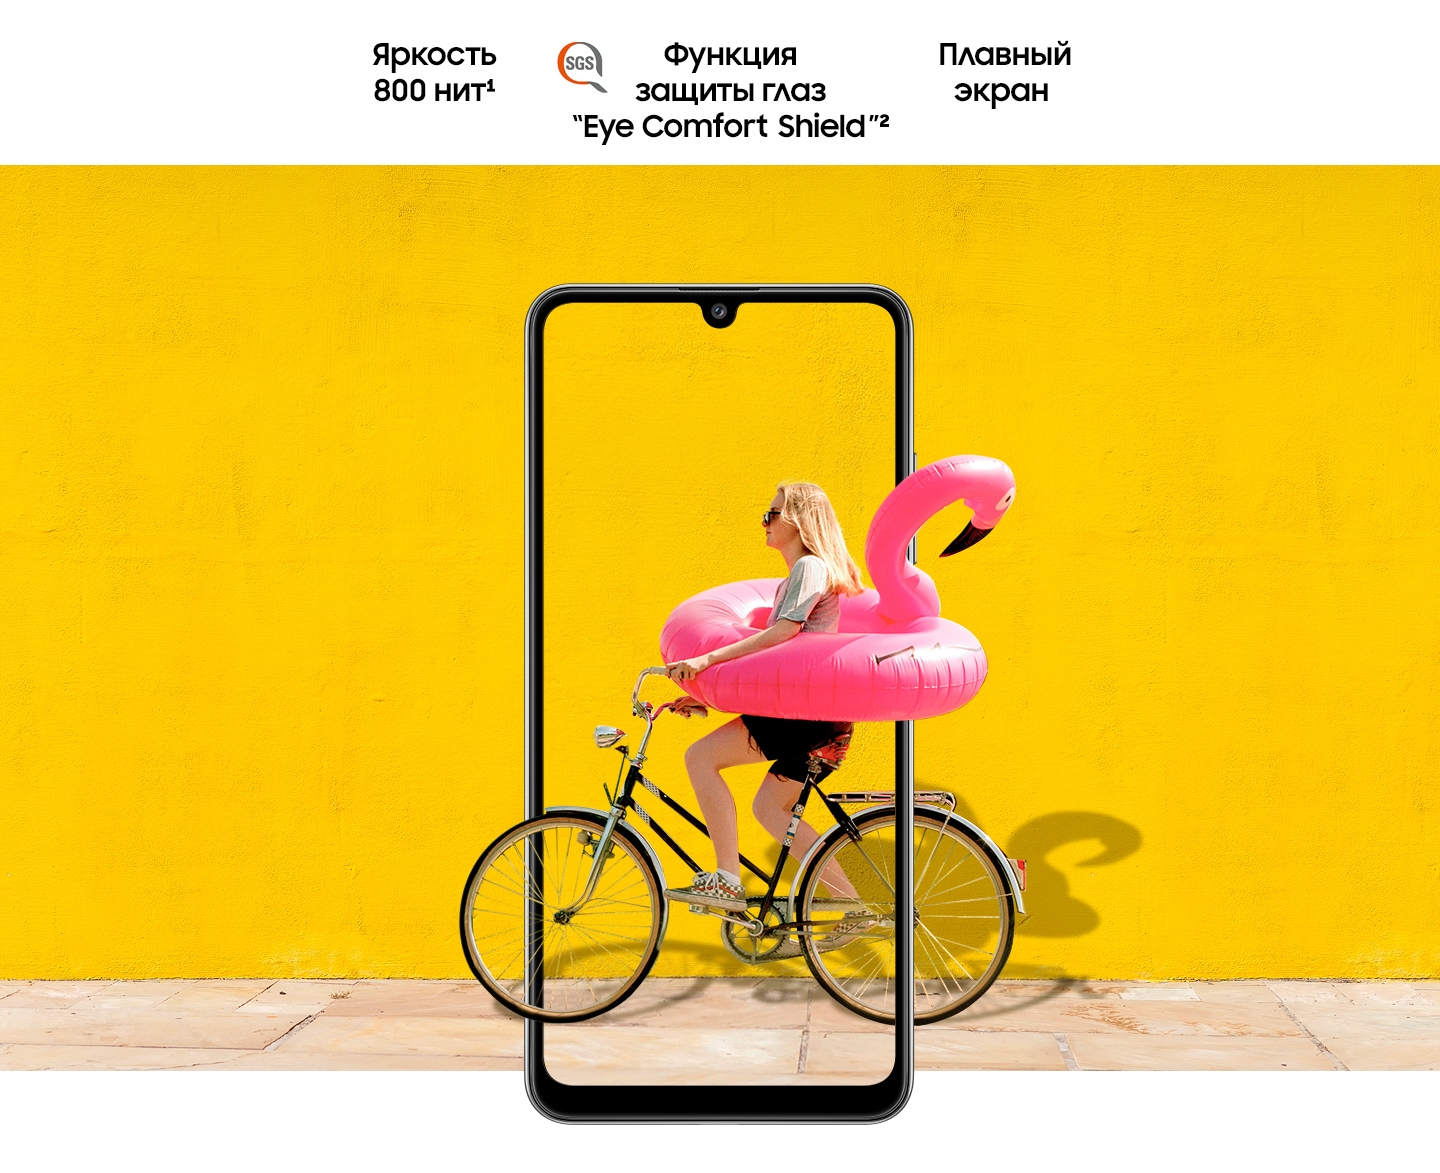 A woman on bike behind Galaxy A32. The picture goes the phone display's edges to represent its immersive view. Text says Brightness 800 nits, Eye Comfort Shield, with the SGS logo and Real Smooth.